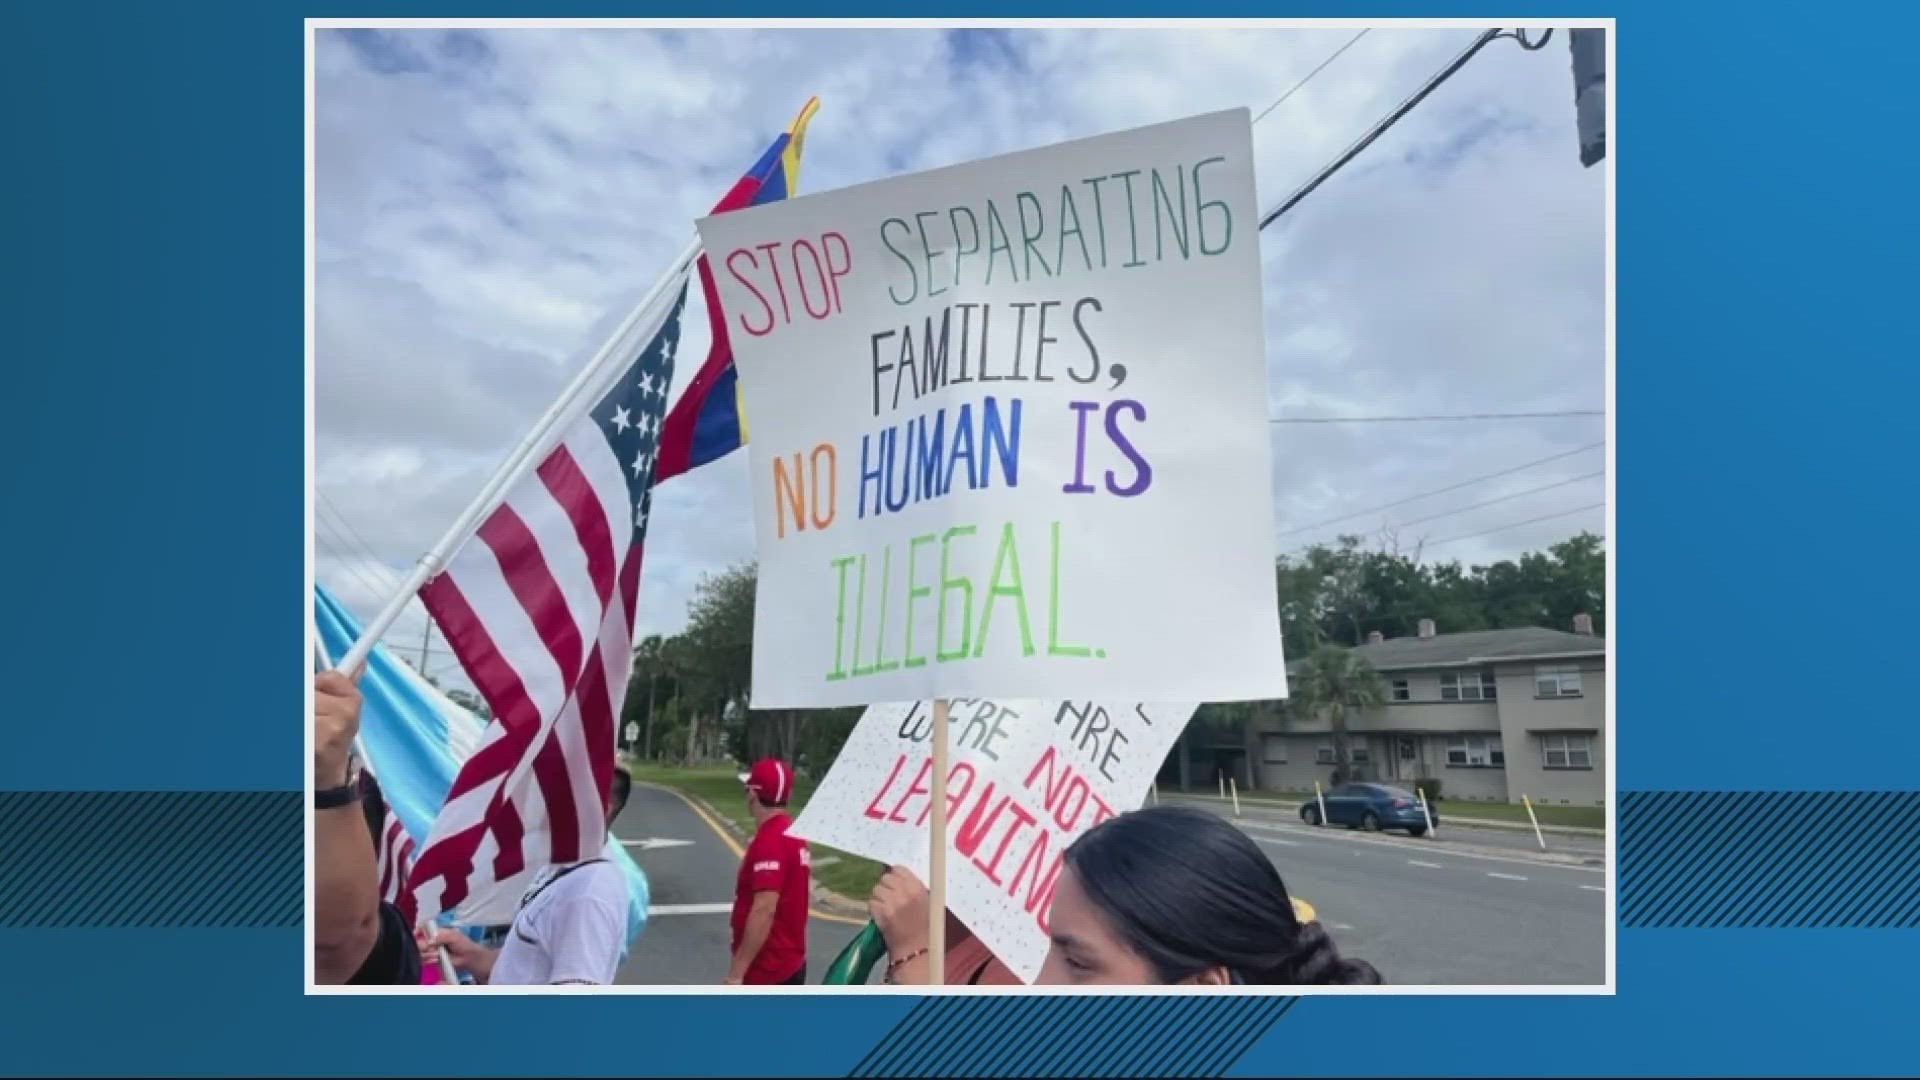 Gov. DeSantis signed SB 1718 on May 10, placing strong limits on undocumented immigrants for social services. The bill will take effect on July 1.